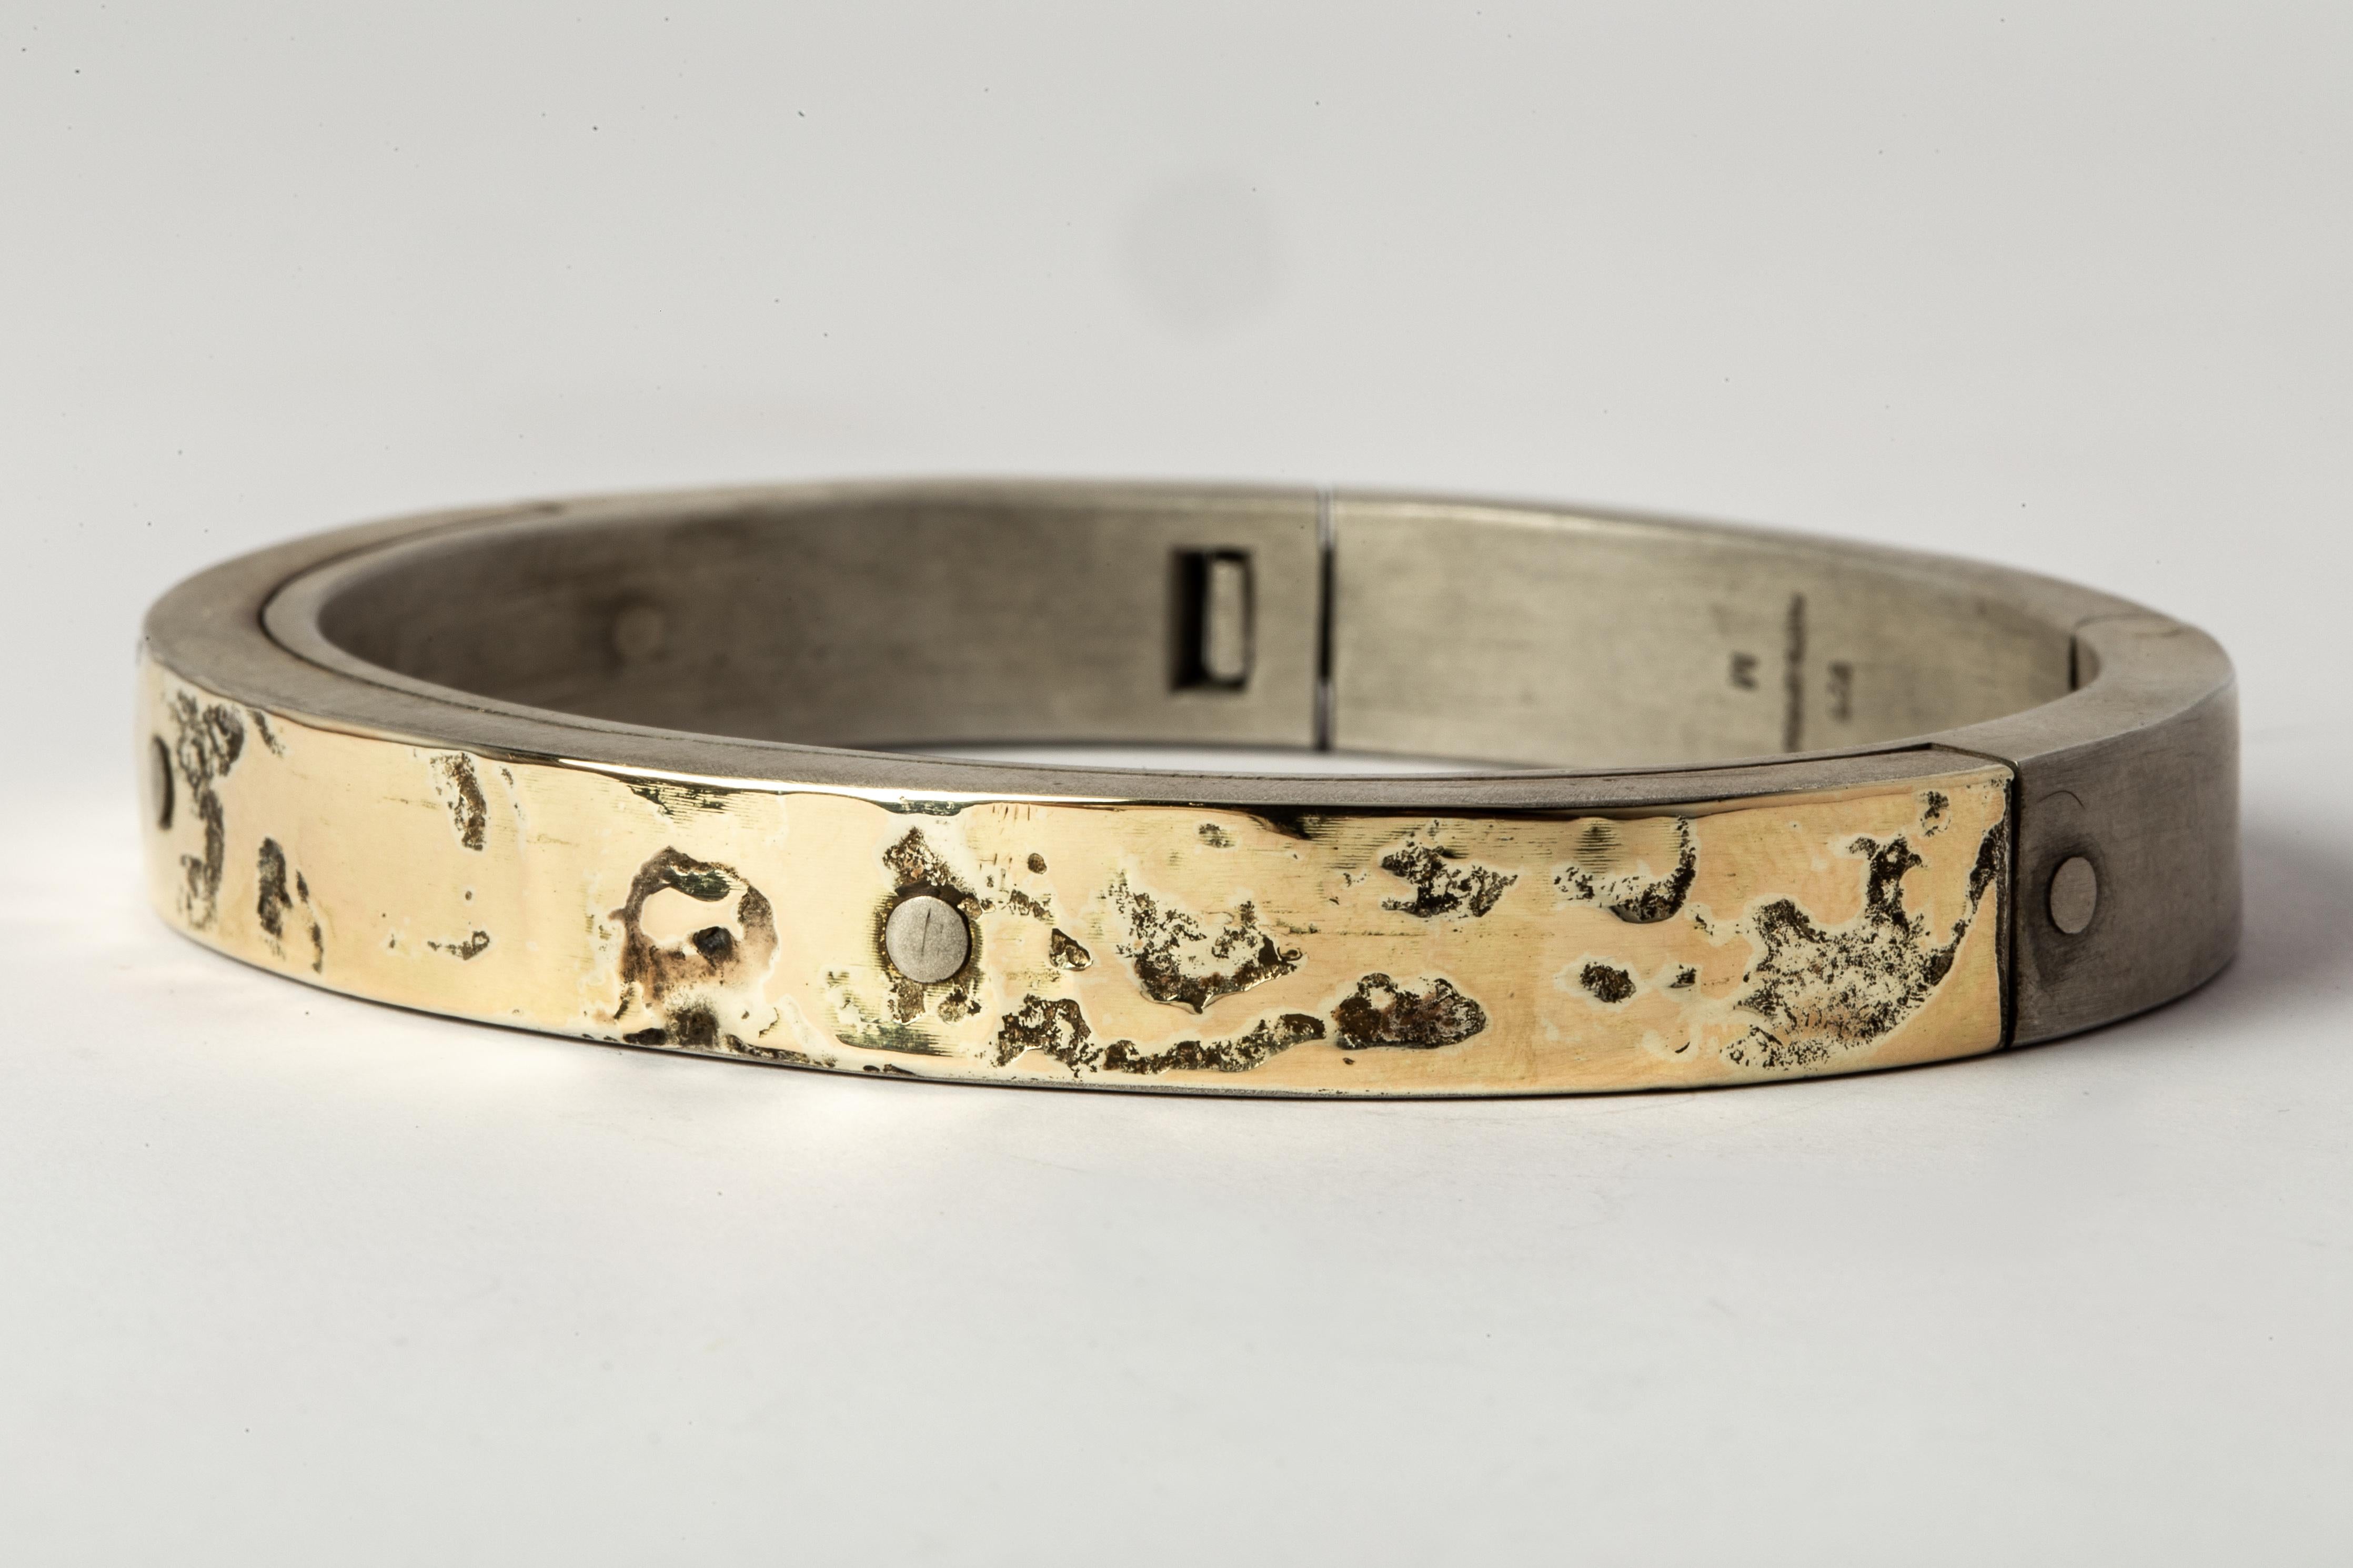 Sistema bracelet in sterling silver and 18k solid yellow gold layer fused on the surface. The 